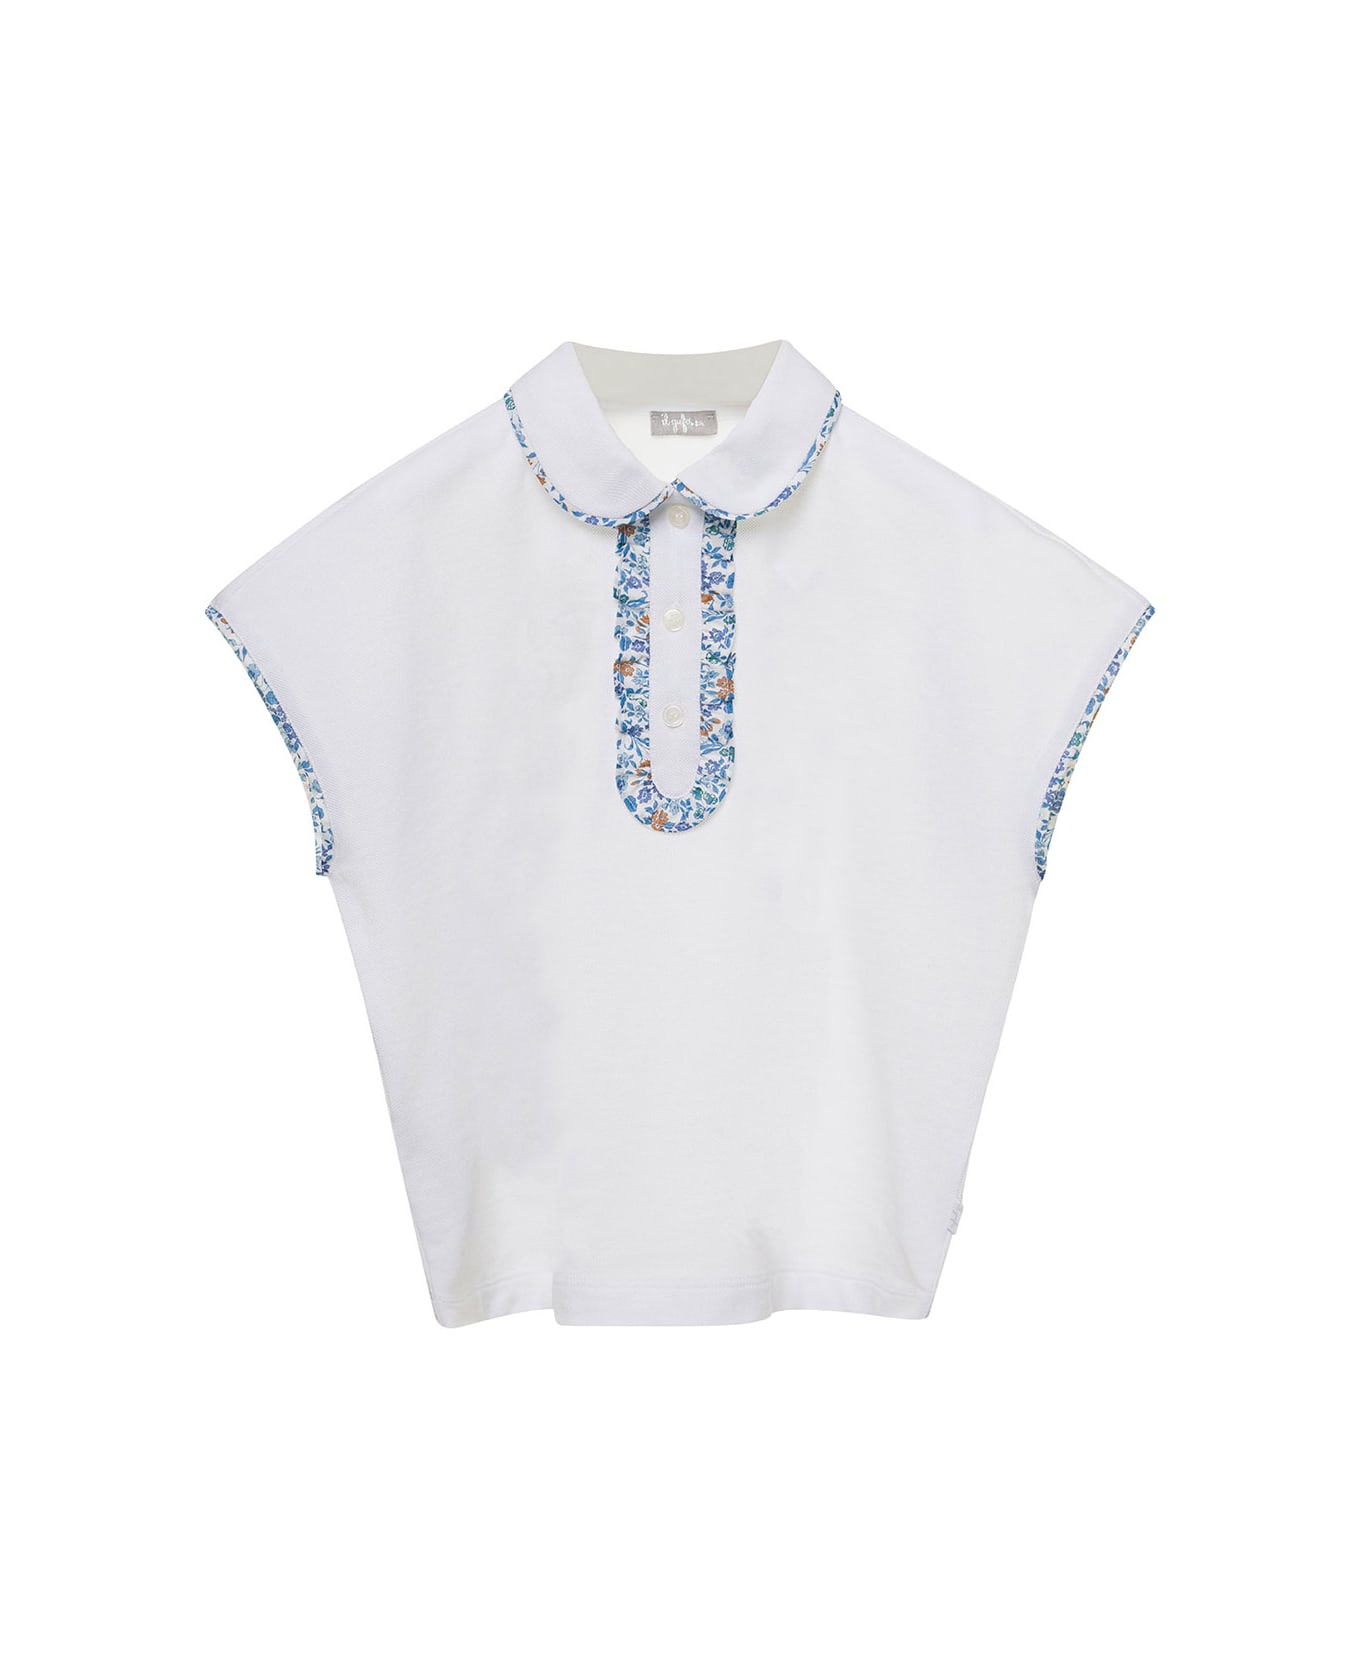 Il Gufo White Cropped Polo With Flower Print Detailing In Cotton Girl - White